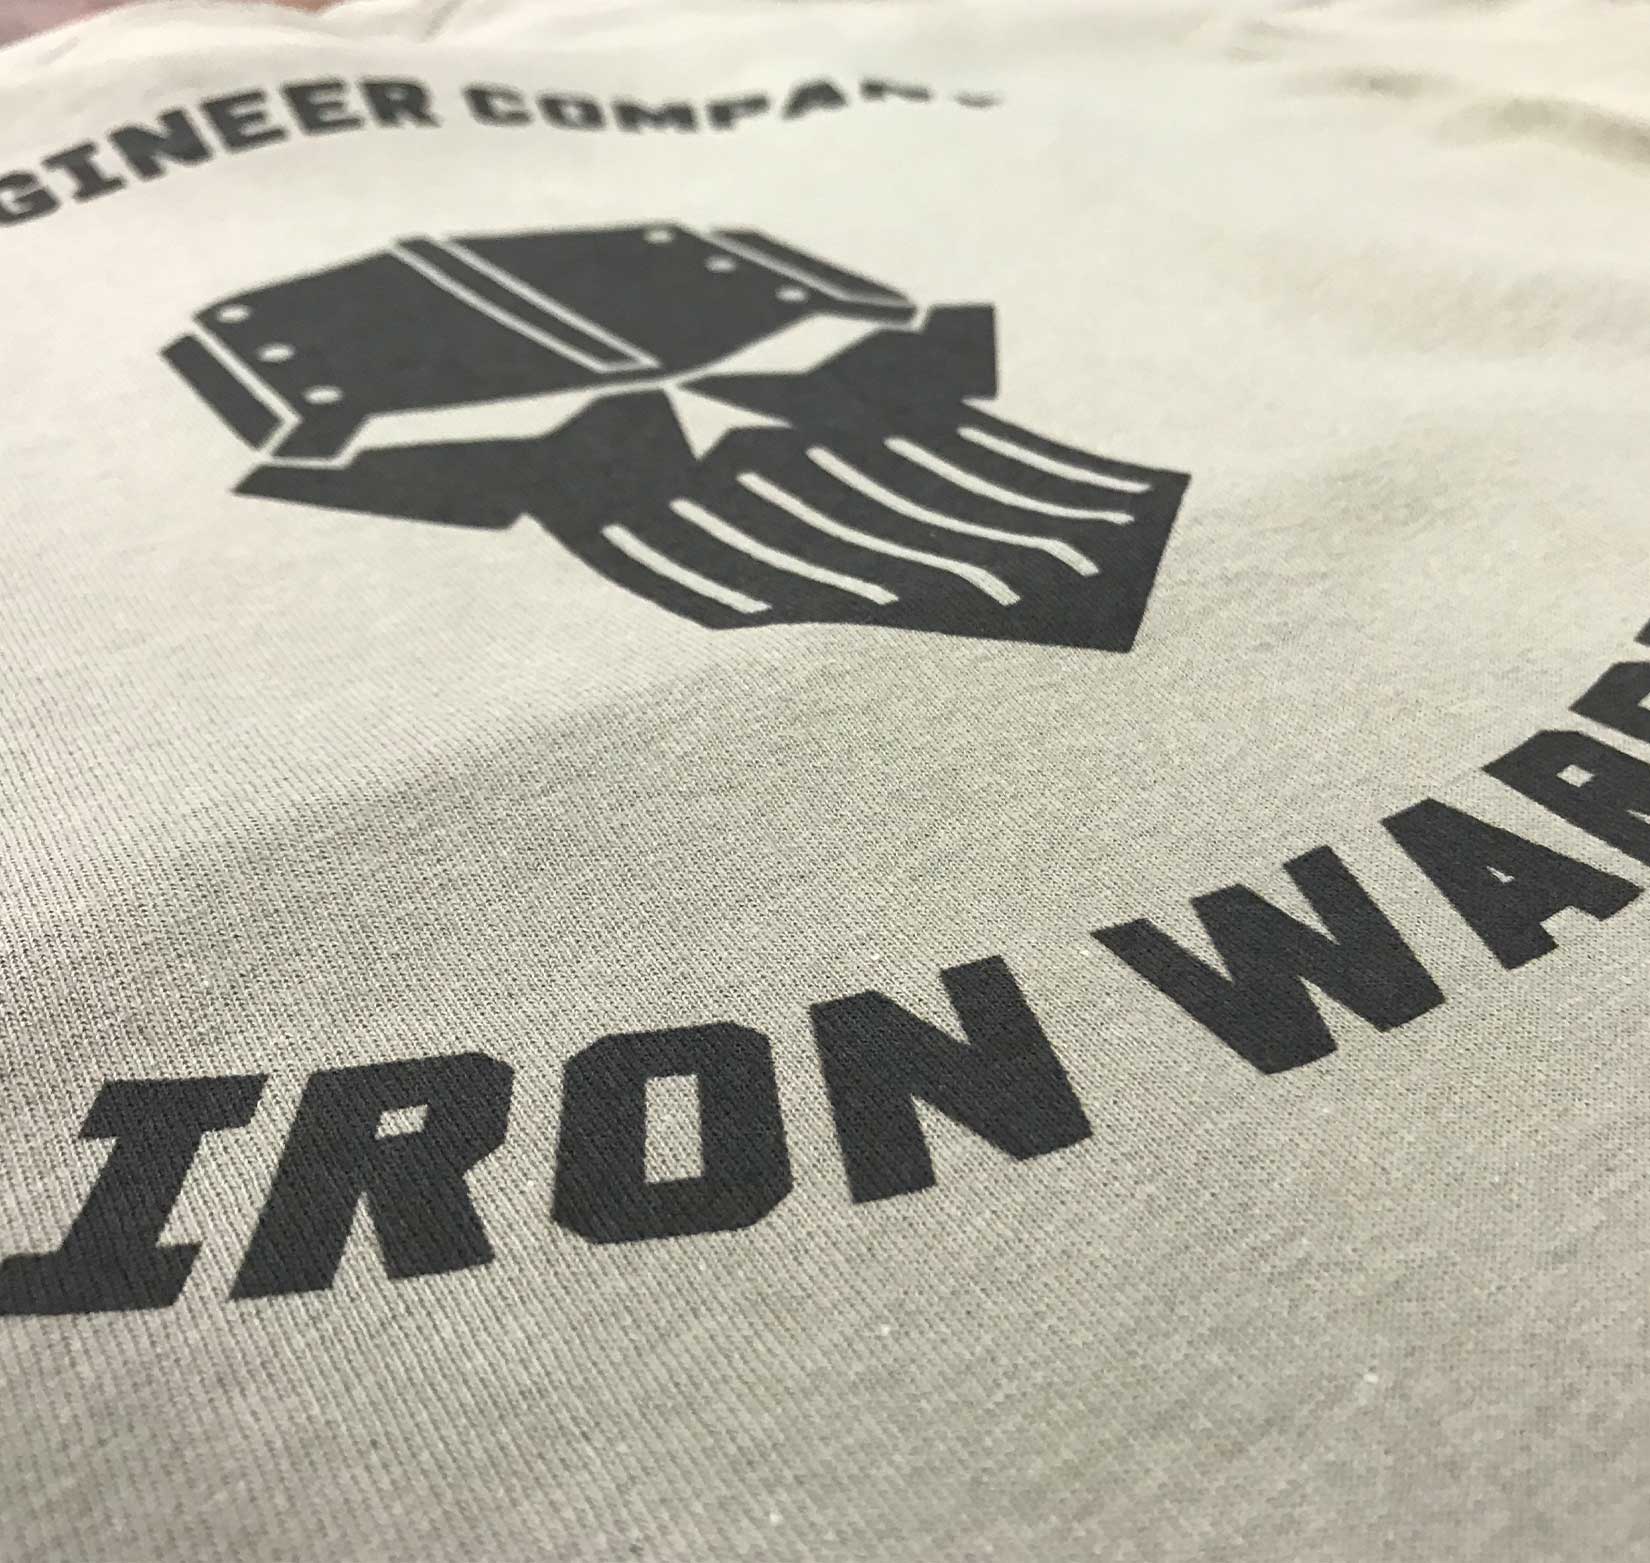 A closeup of a light tan t-shirt screen printed with a black logo that says “iron warriors” in all-caps text